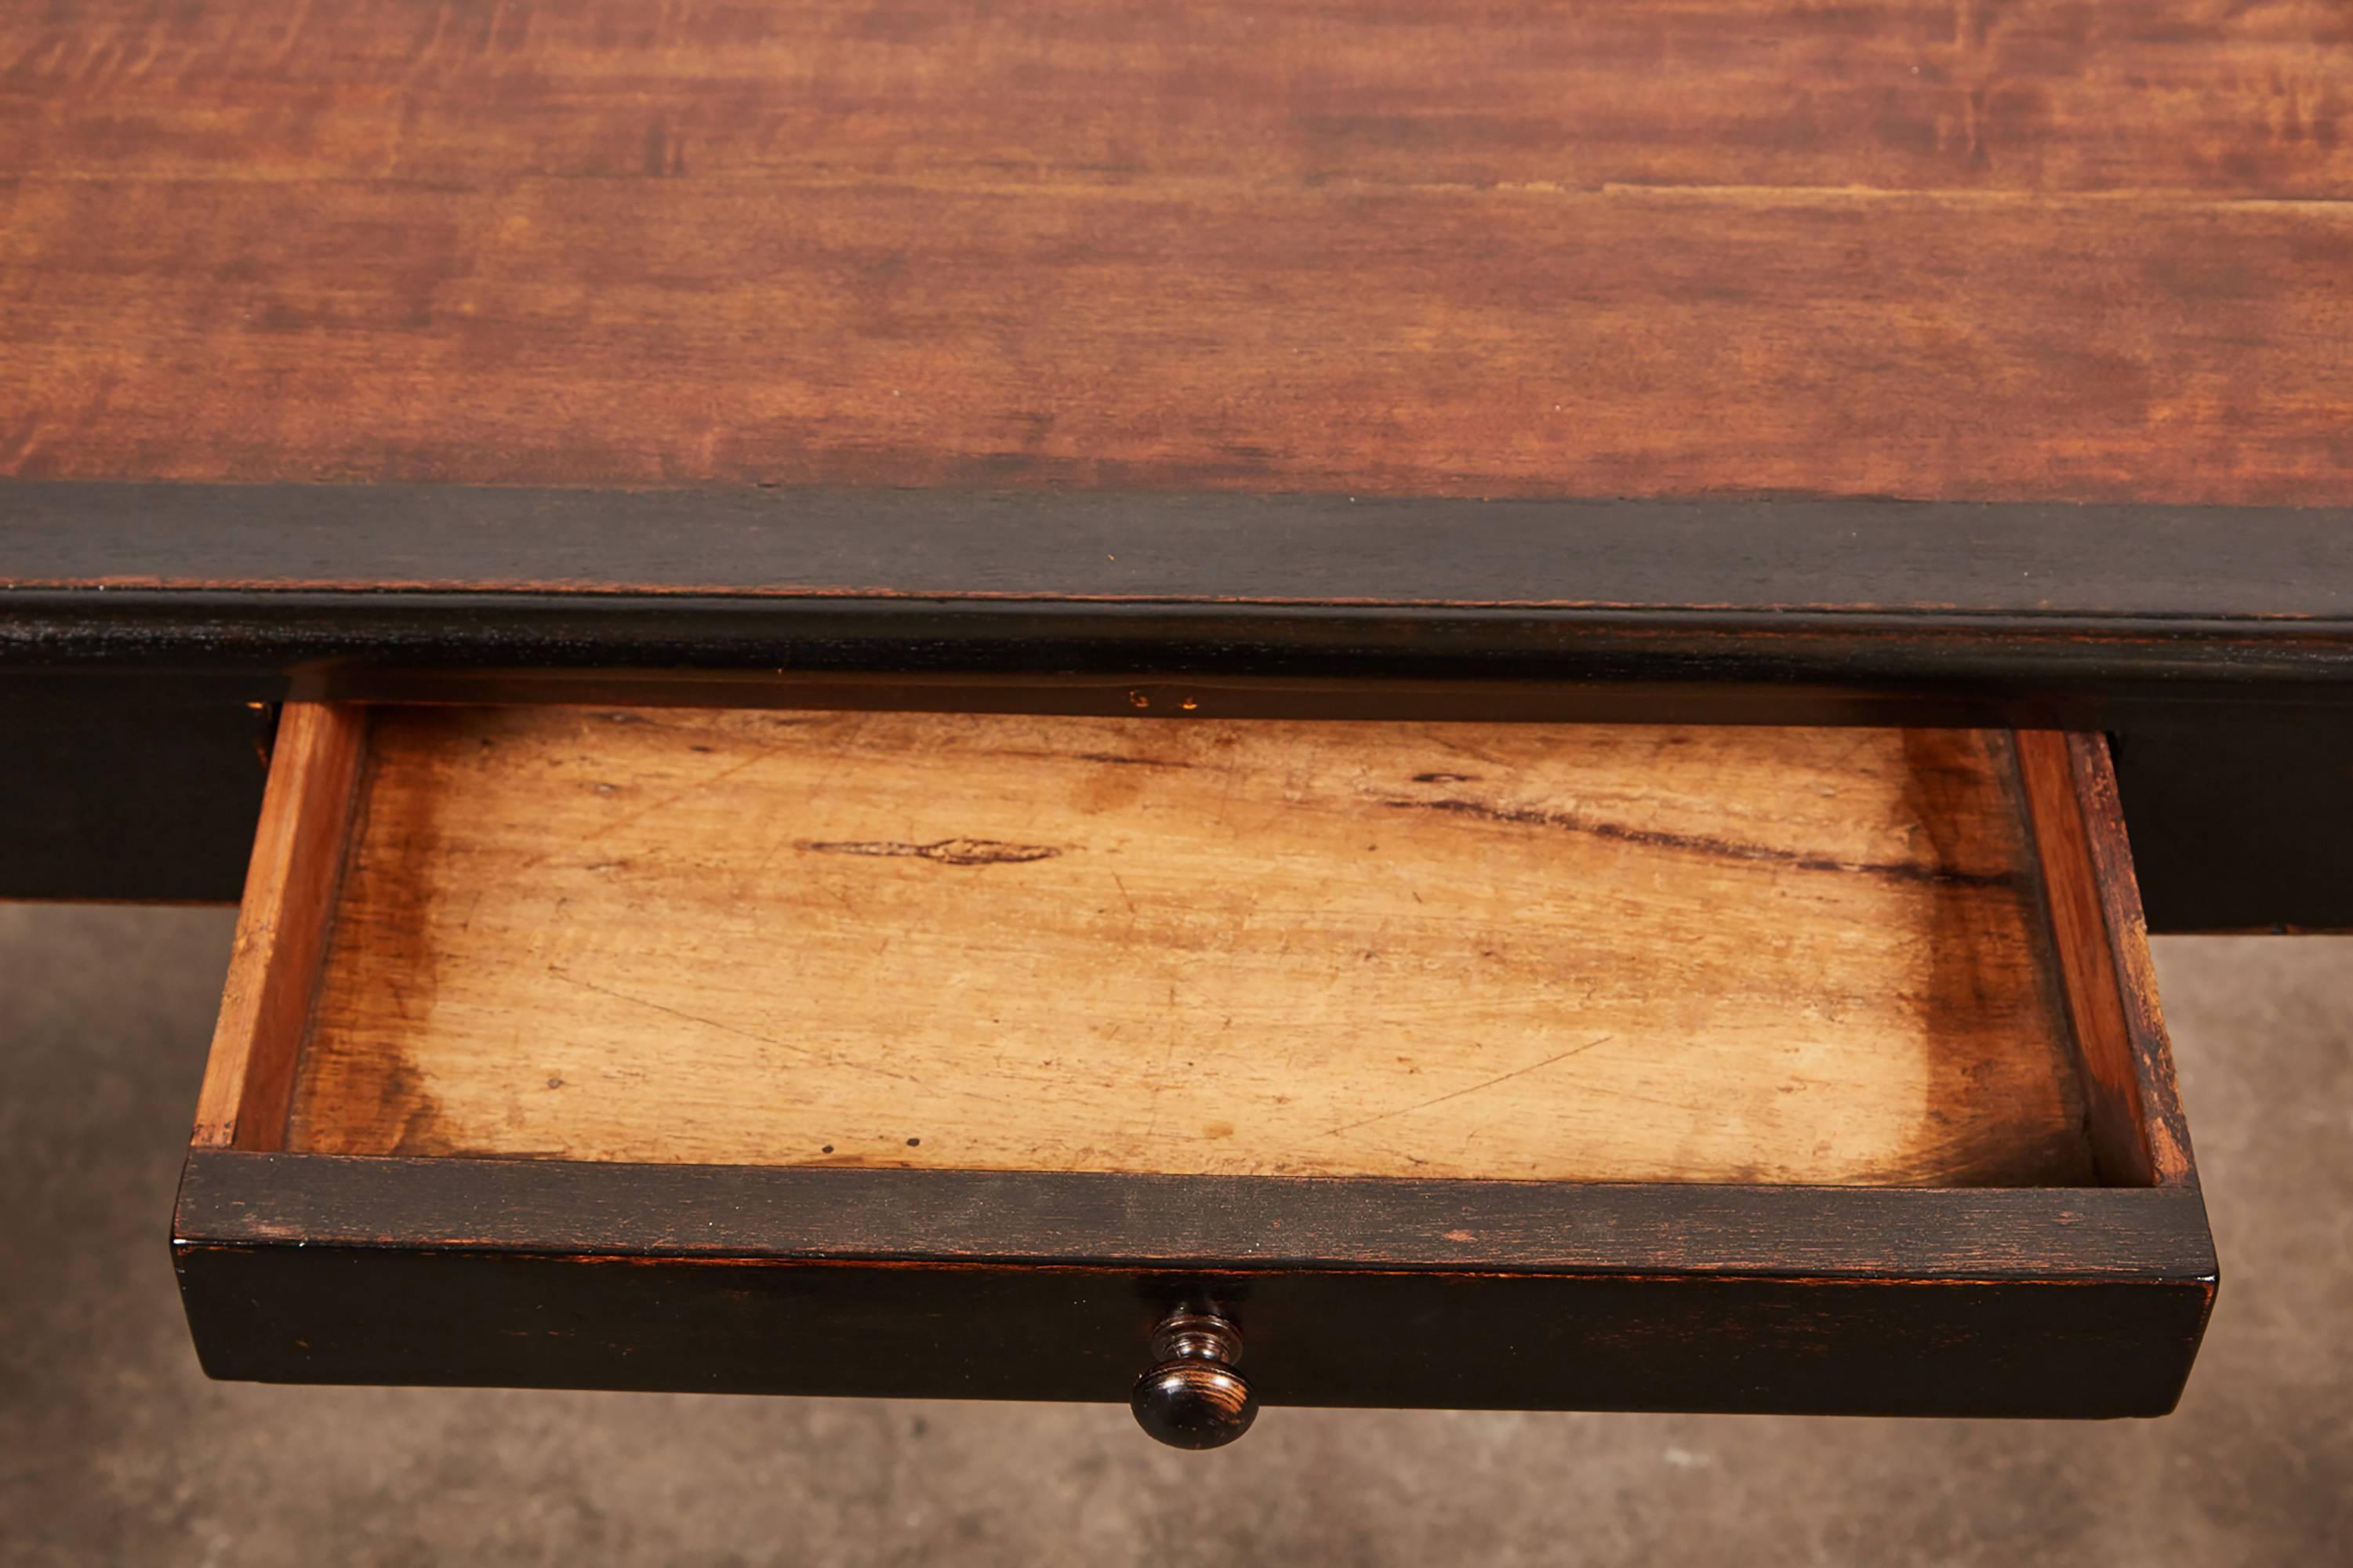 Early 20th Century French Colonial Rosewood Desk 2